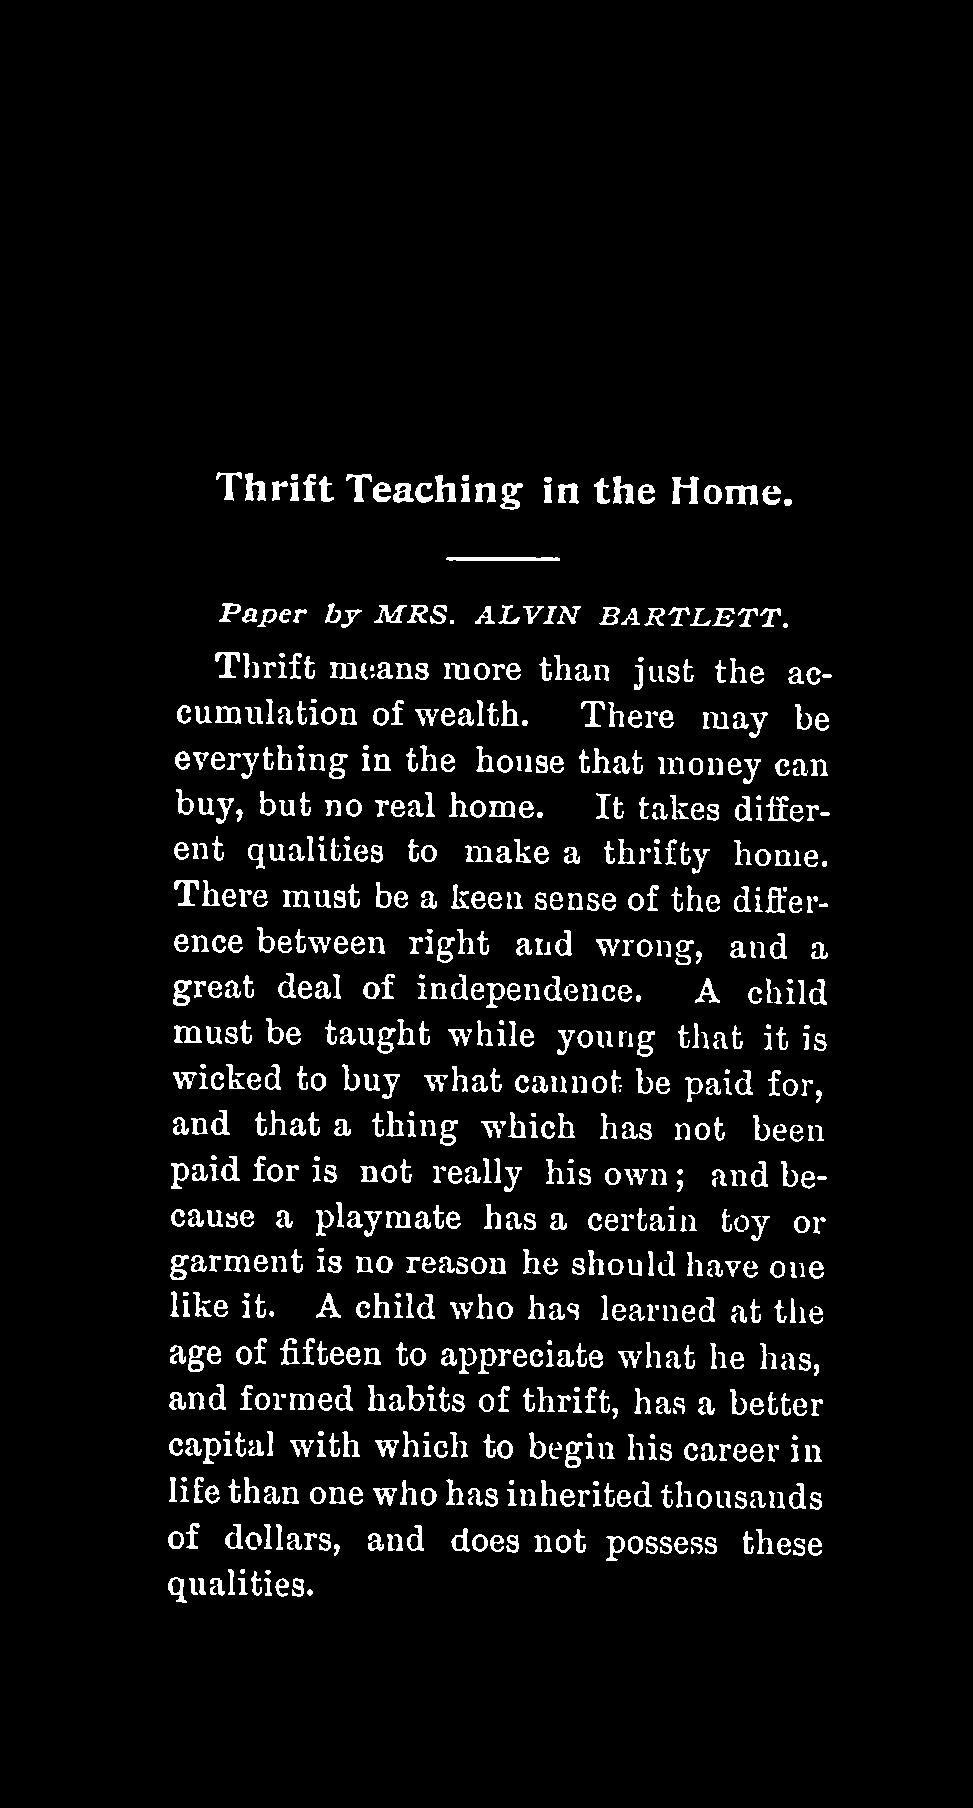 Thrift Teaching in the Home. P a p er b y M R S. A L V IN B A R T L E T T. Thrift means more than just the accumulation of wealth.